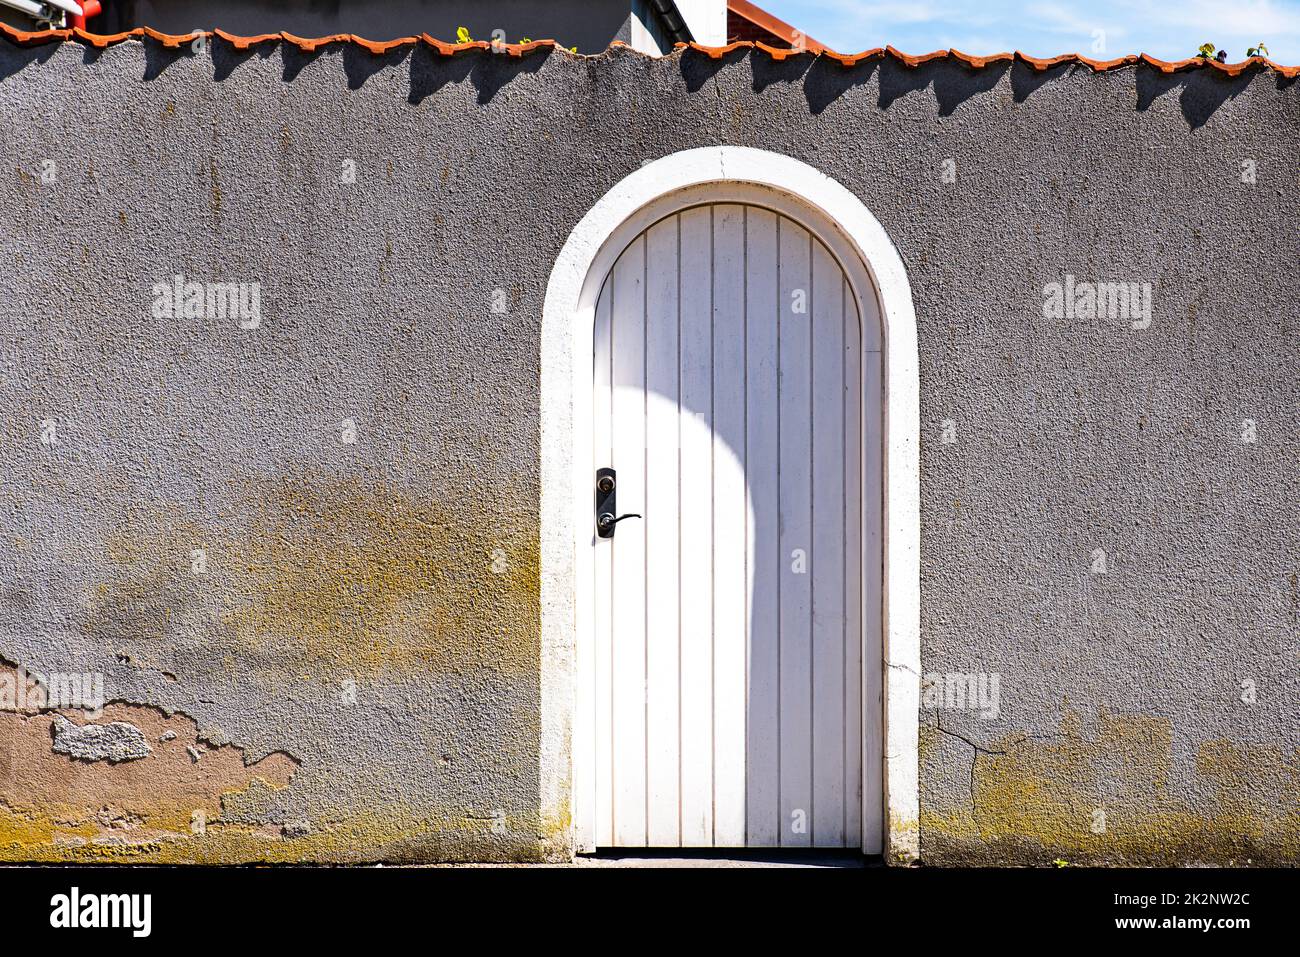 Front view of white arched closed door on worn grey wall conveys end of conversation or stop negotiation. Entrance or exit arch with shut wooden gate Stock Photo